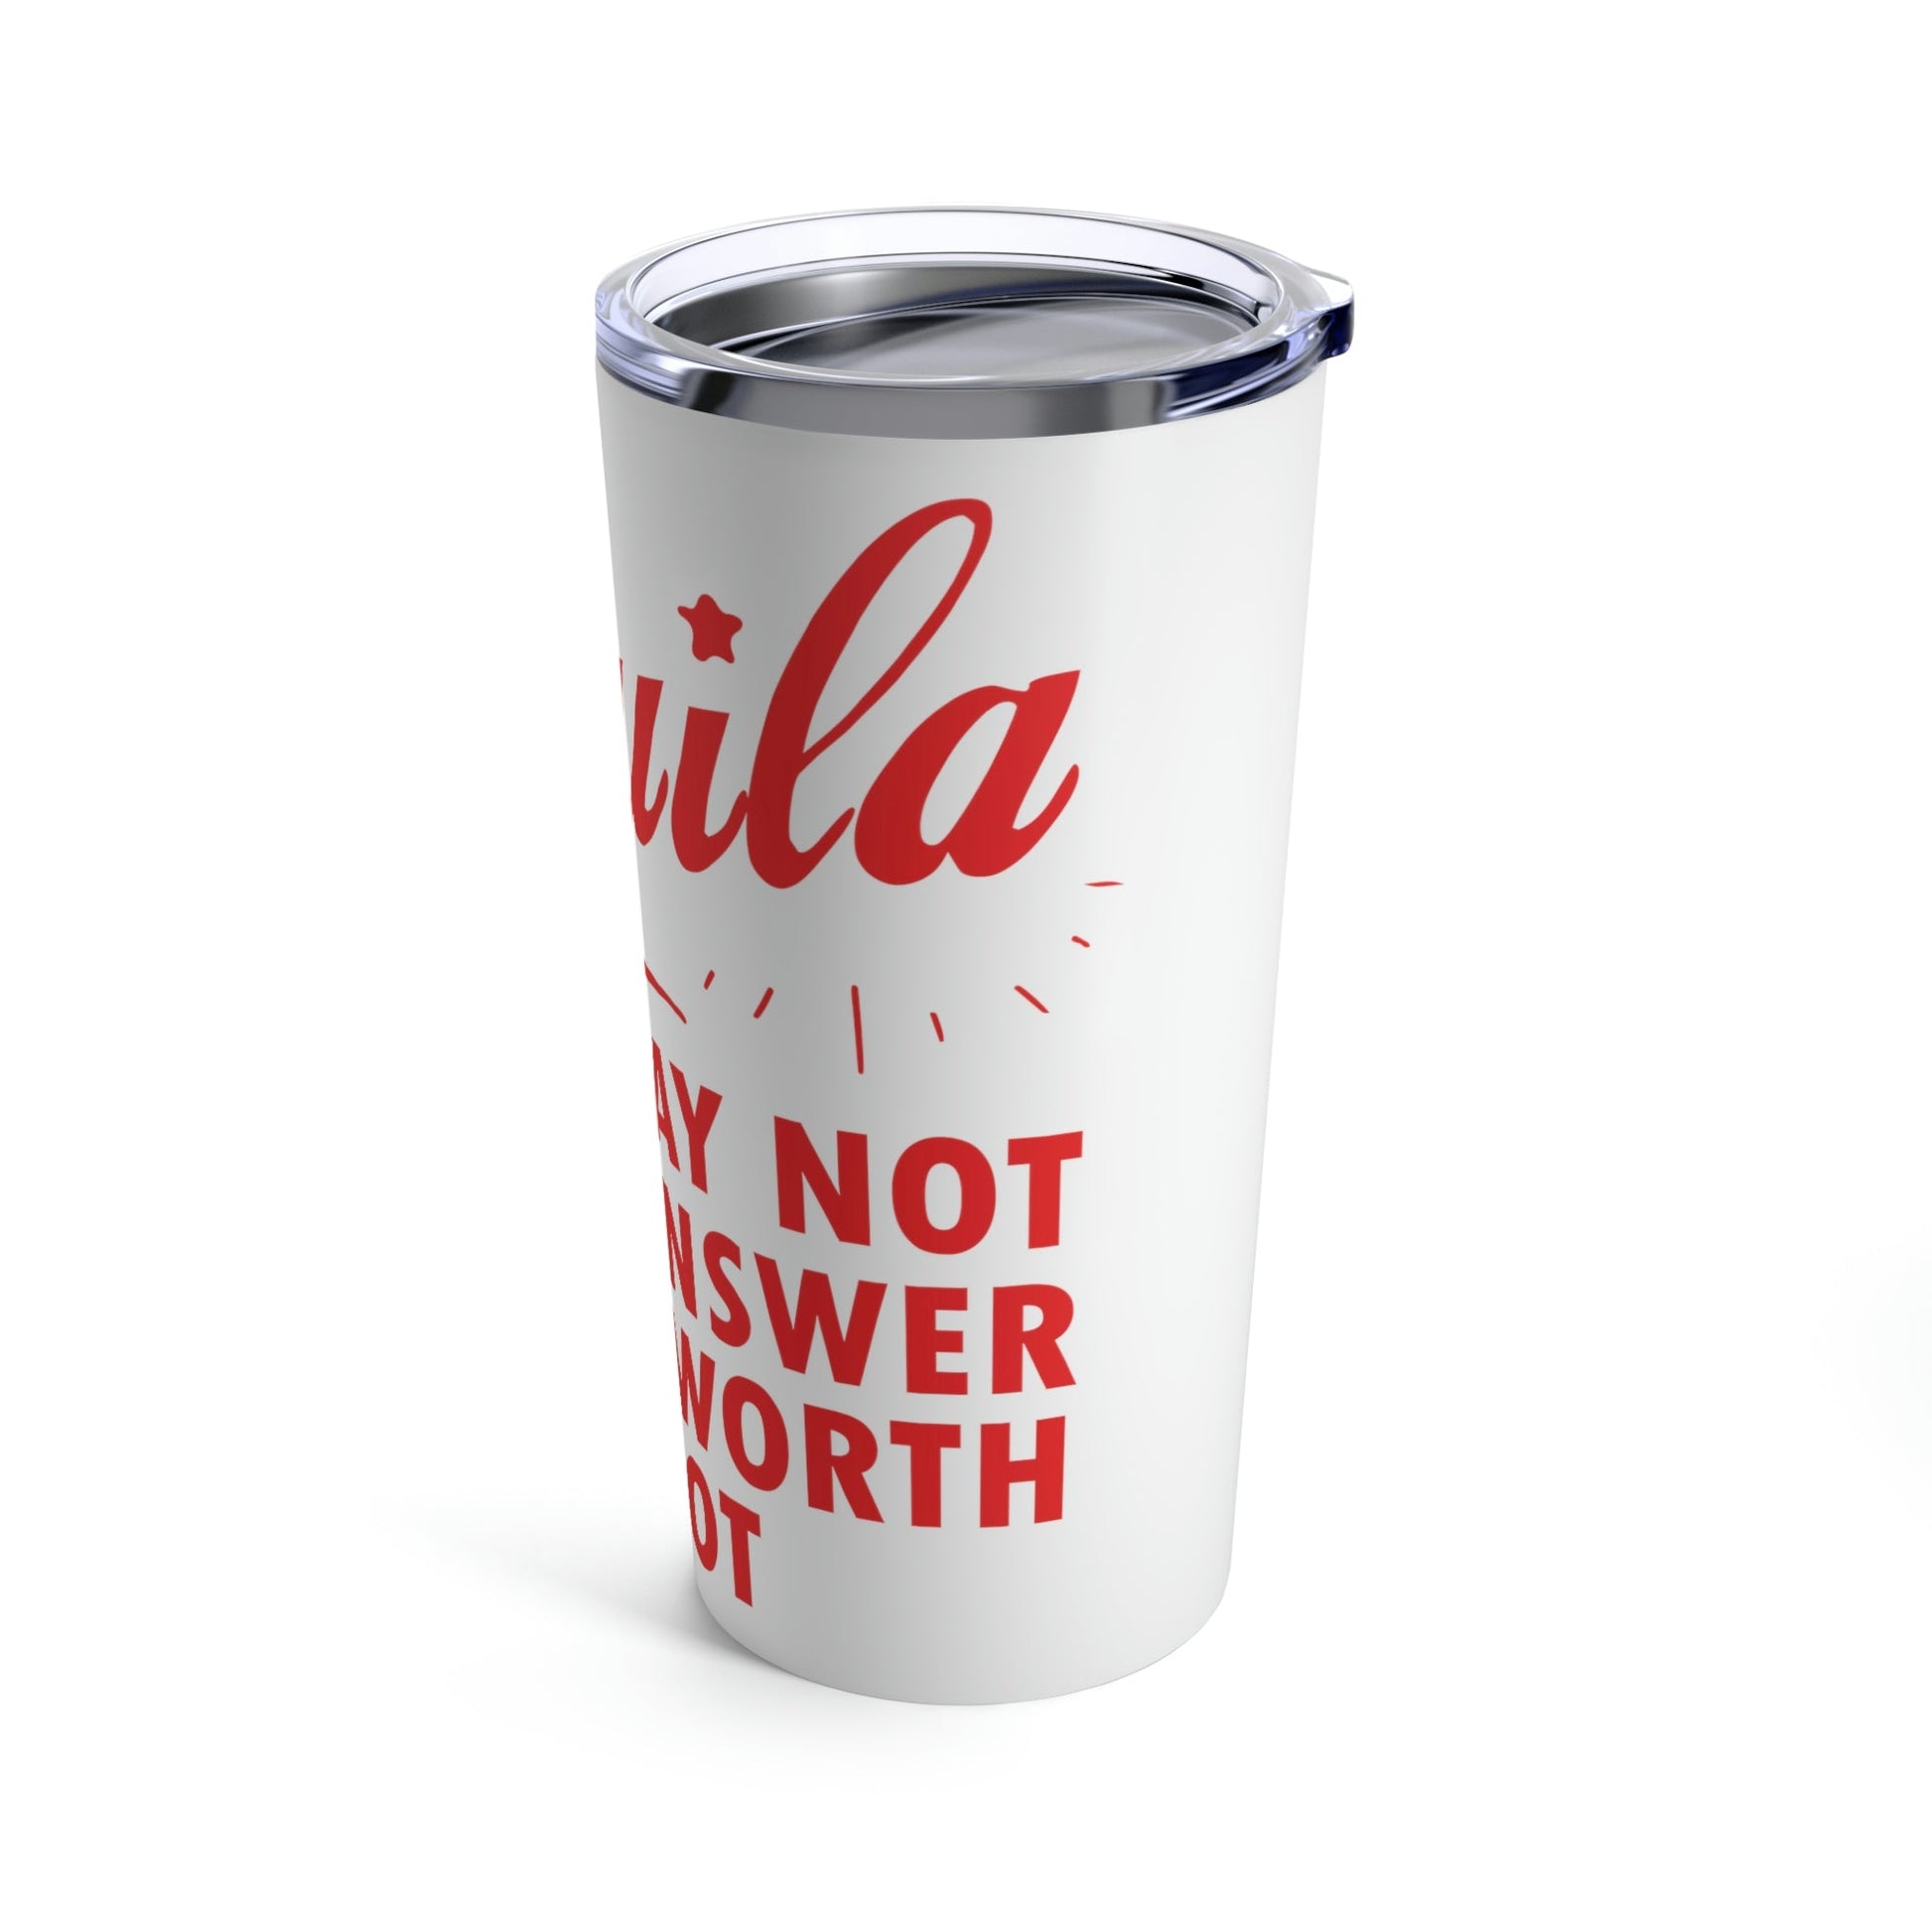 Tequila May Not Be The Answer But It’s Worth A Shot Bar Lovers Slogans Stainless Steel Hot or Cold Vacuum Tumbler 20oz Ichaku [Perfect Gifts Selection]